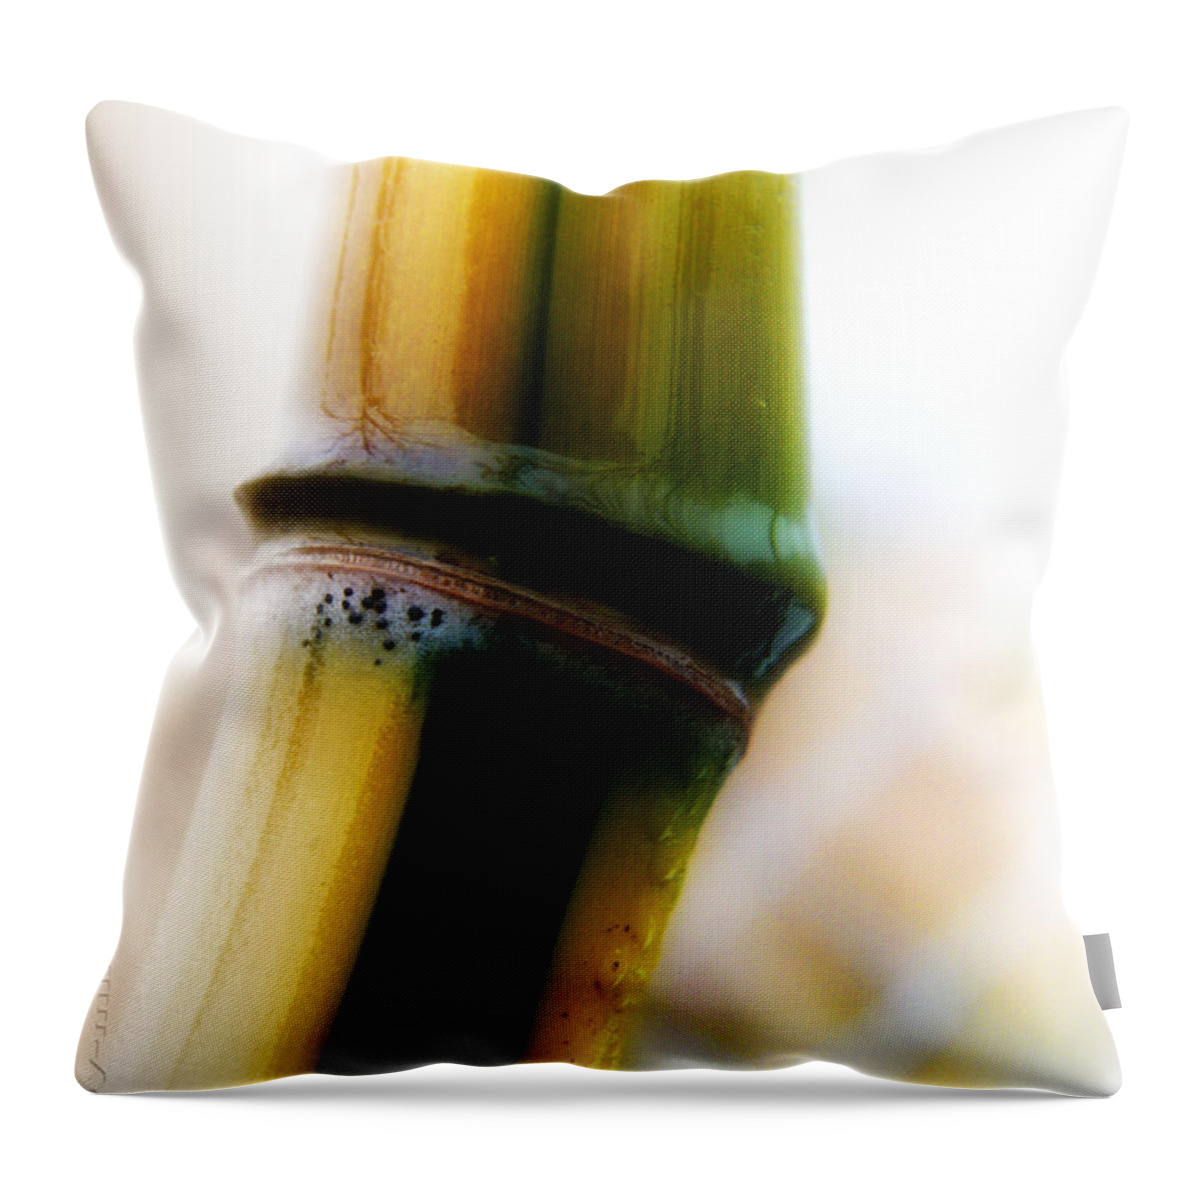 Bamboo Throw Pillow featuring the photograph Bamboo by Mimulux Patricia No